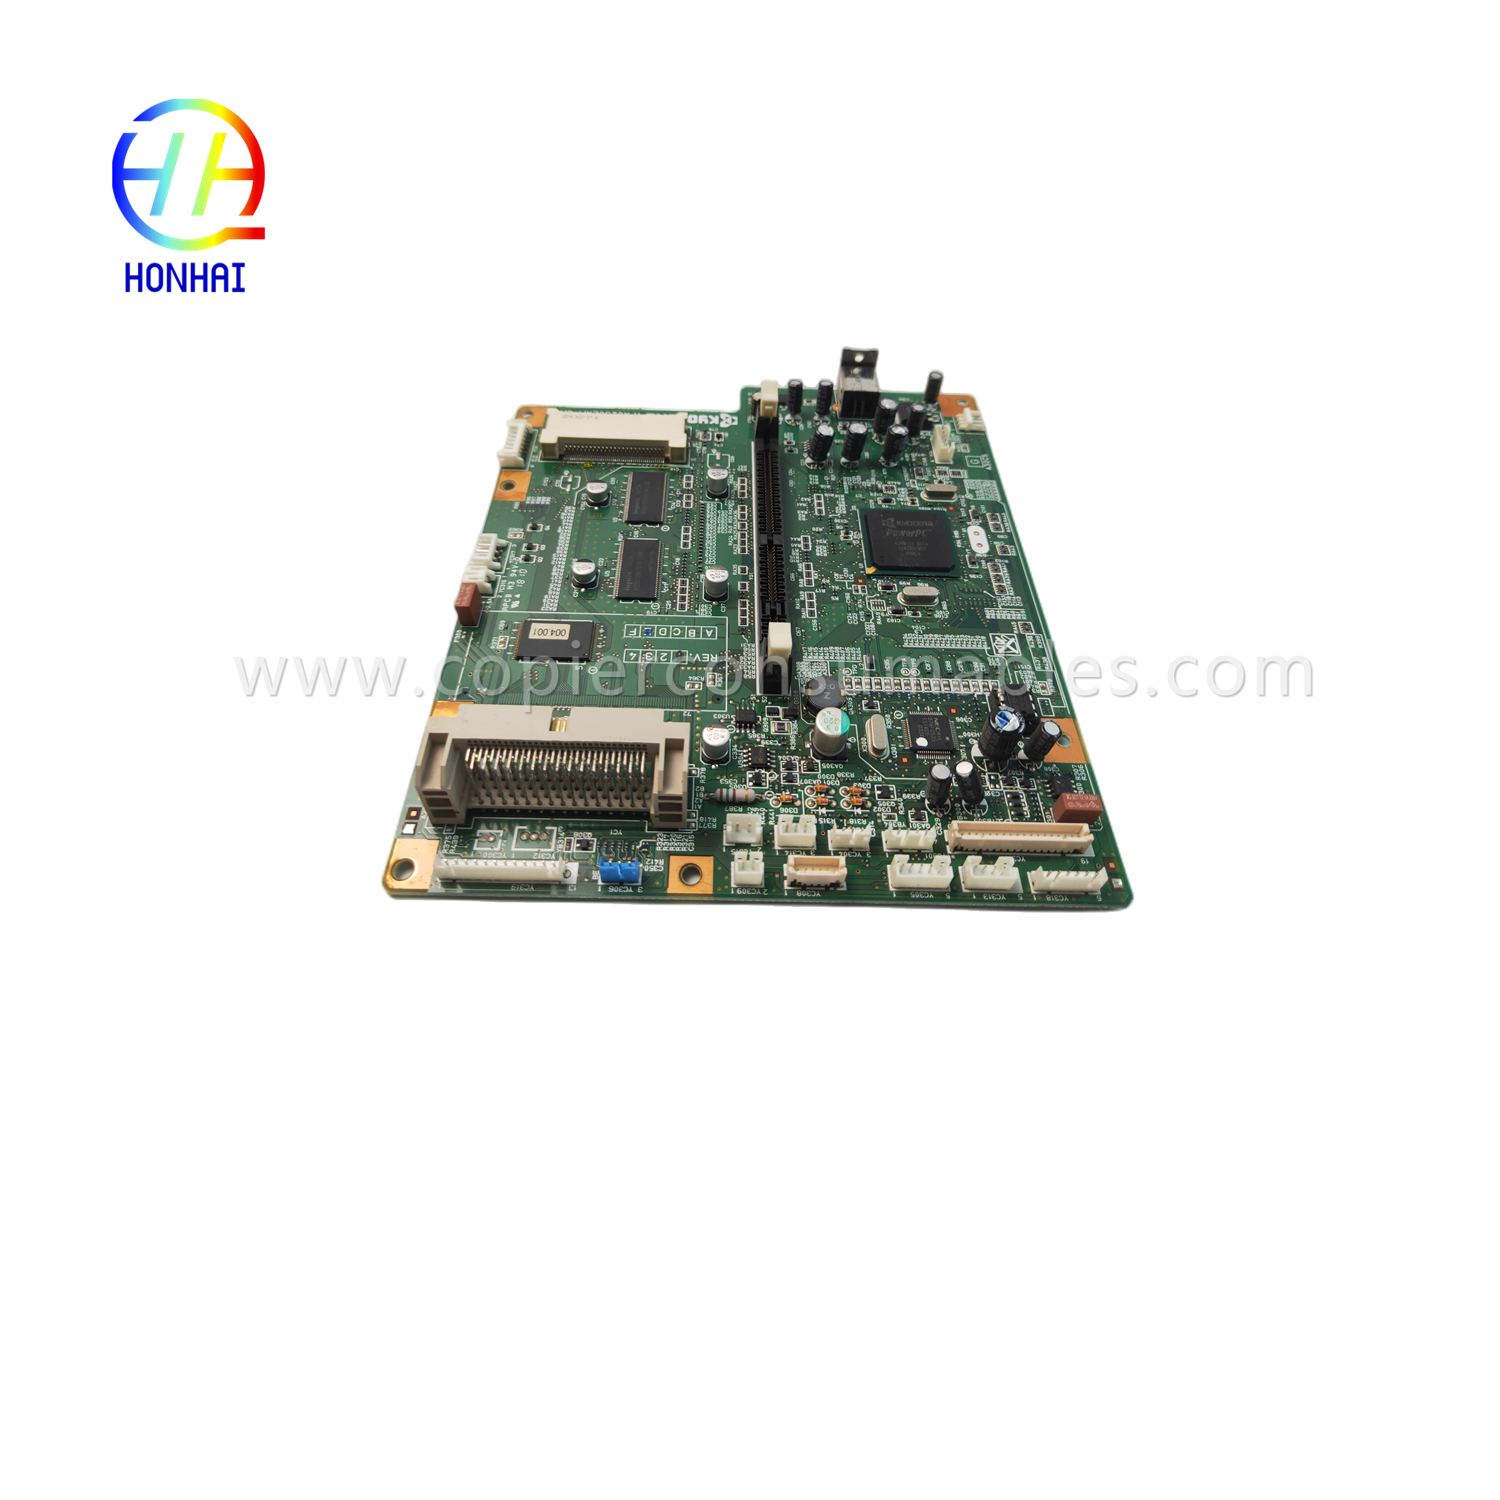 https://www.copierconsumables.com/mainboard-for-kyocera-fs-1300d-1300dn-7pa0230eamgh01-formatter-board-product/